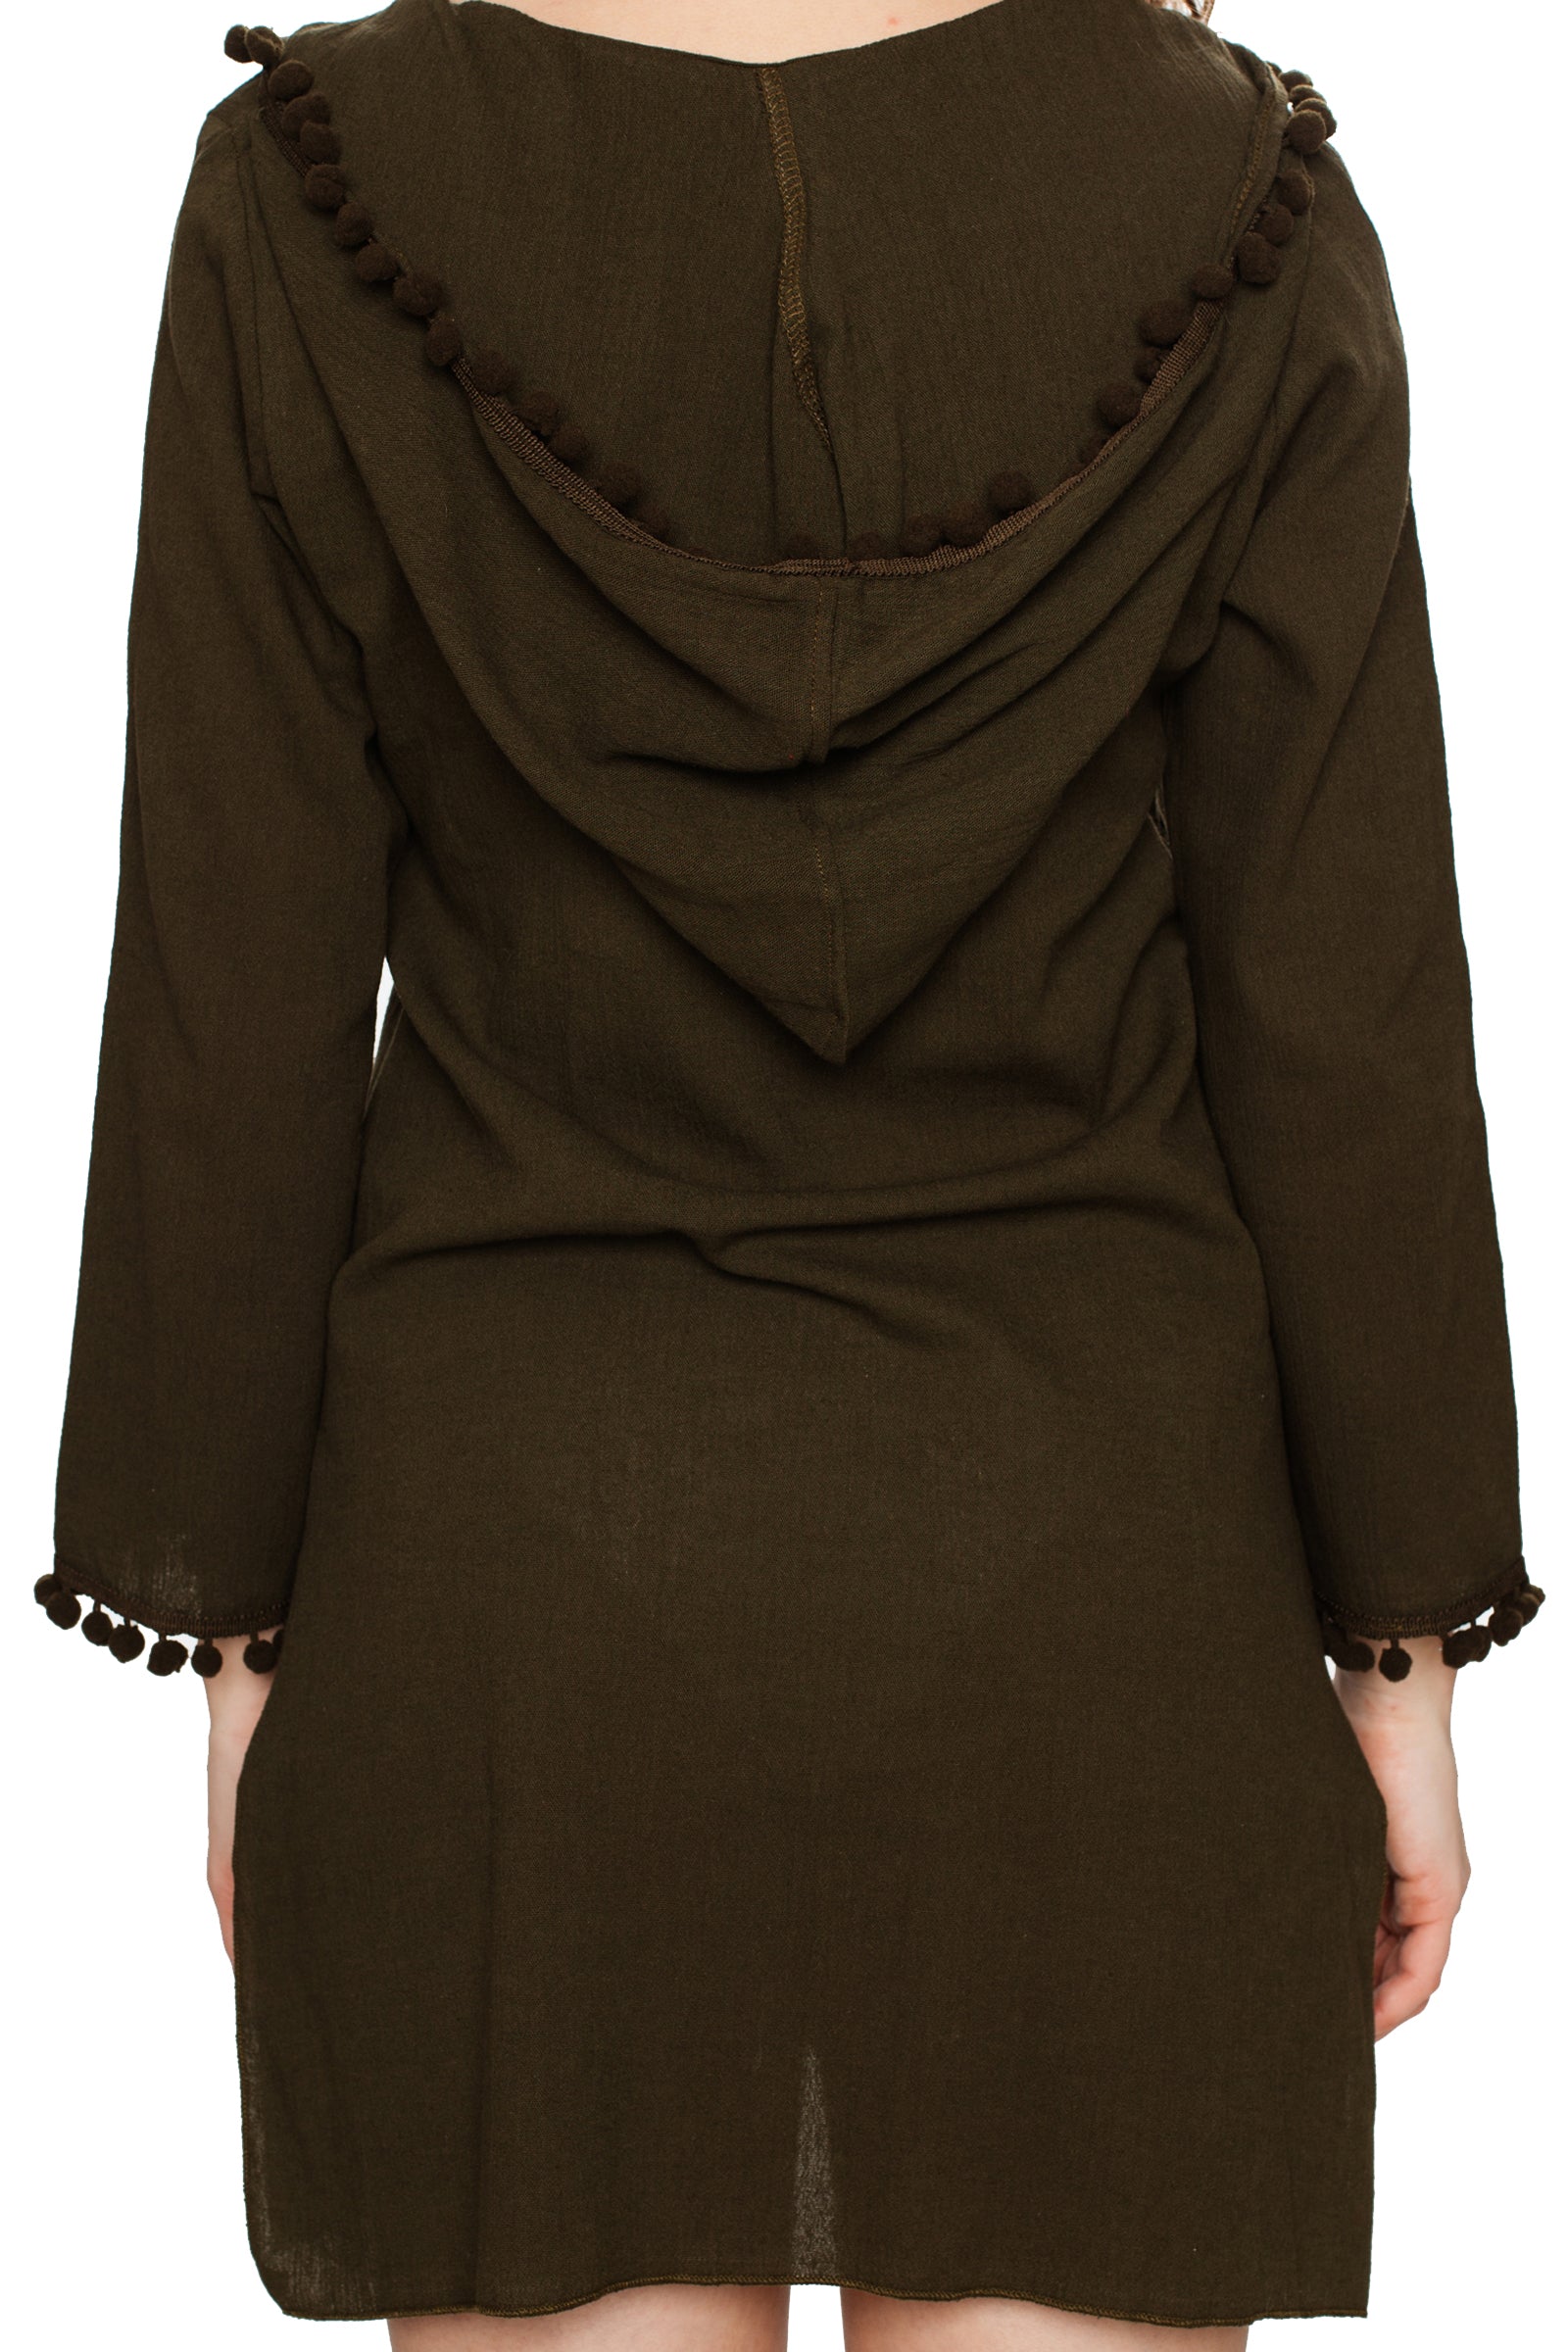 Green Hooded Long Sleeve Cotton Coverup